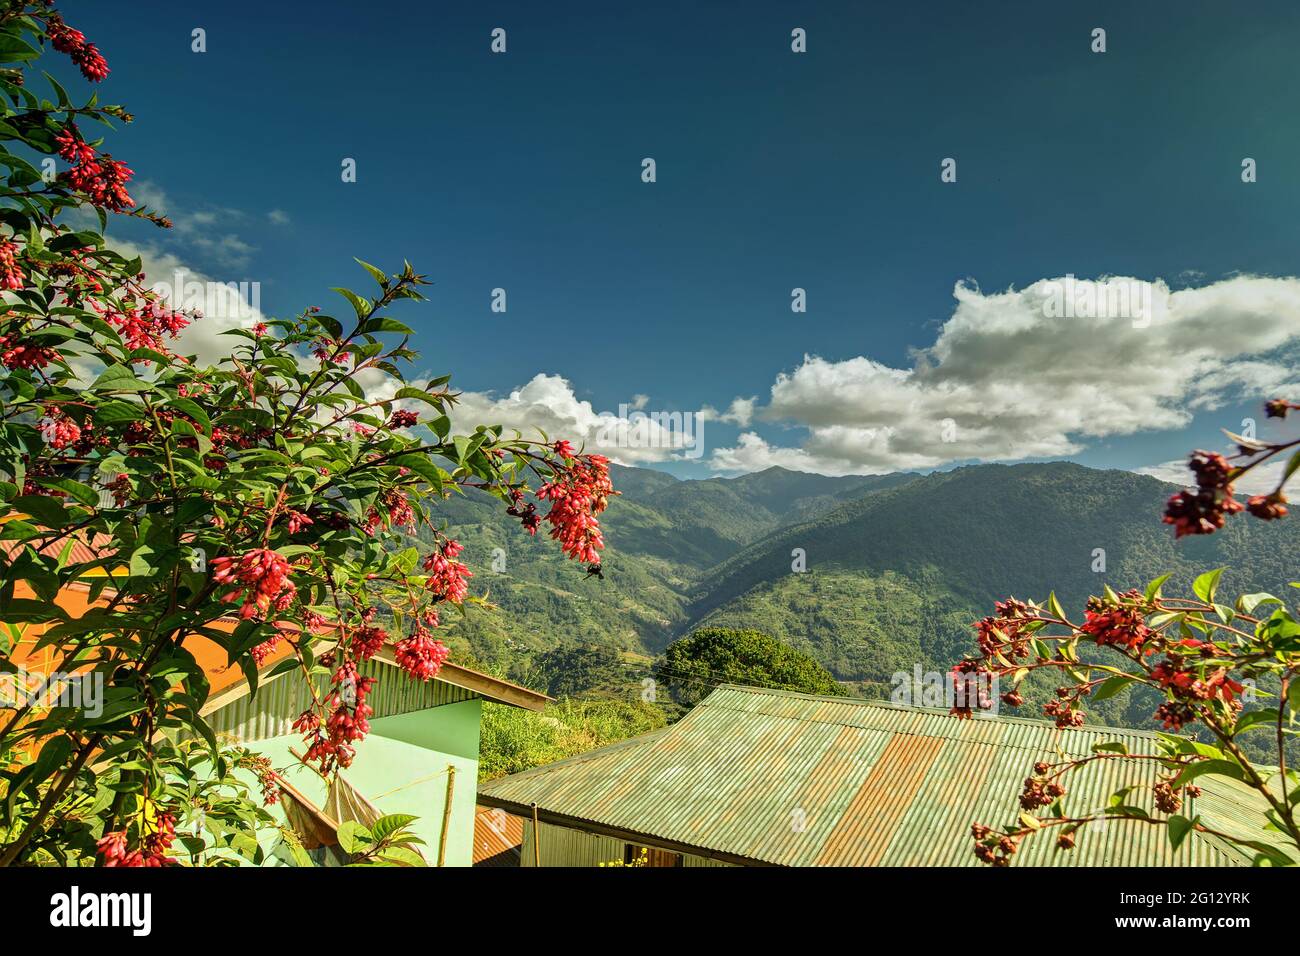 Blue Kanchenjunga mountain range in the morning, tree with red seasonal flowers in foreground, view from Okhrey Village, Sikkim. Scenic view of great Stock Photo